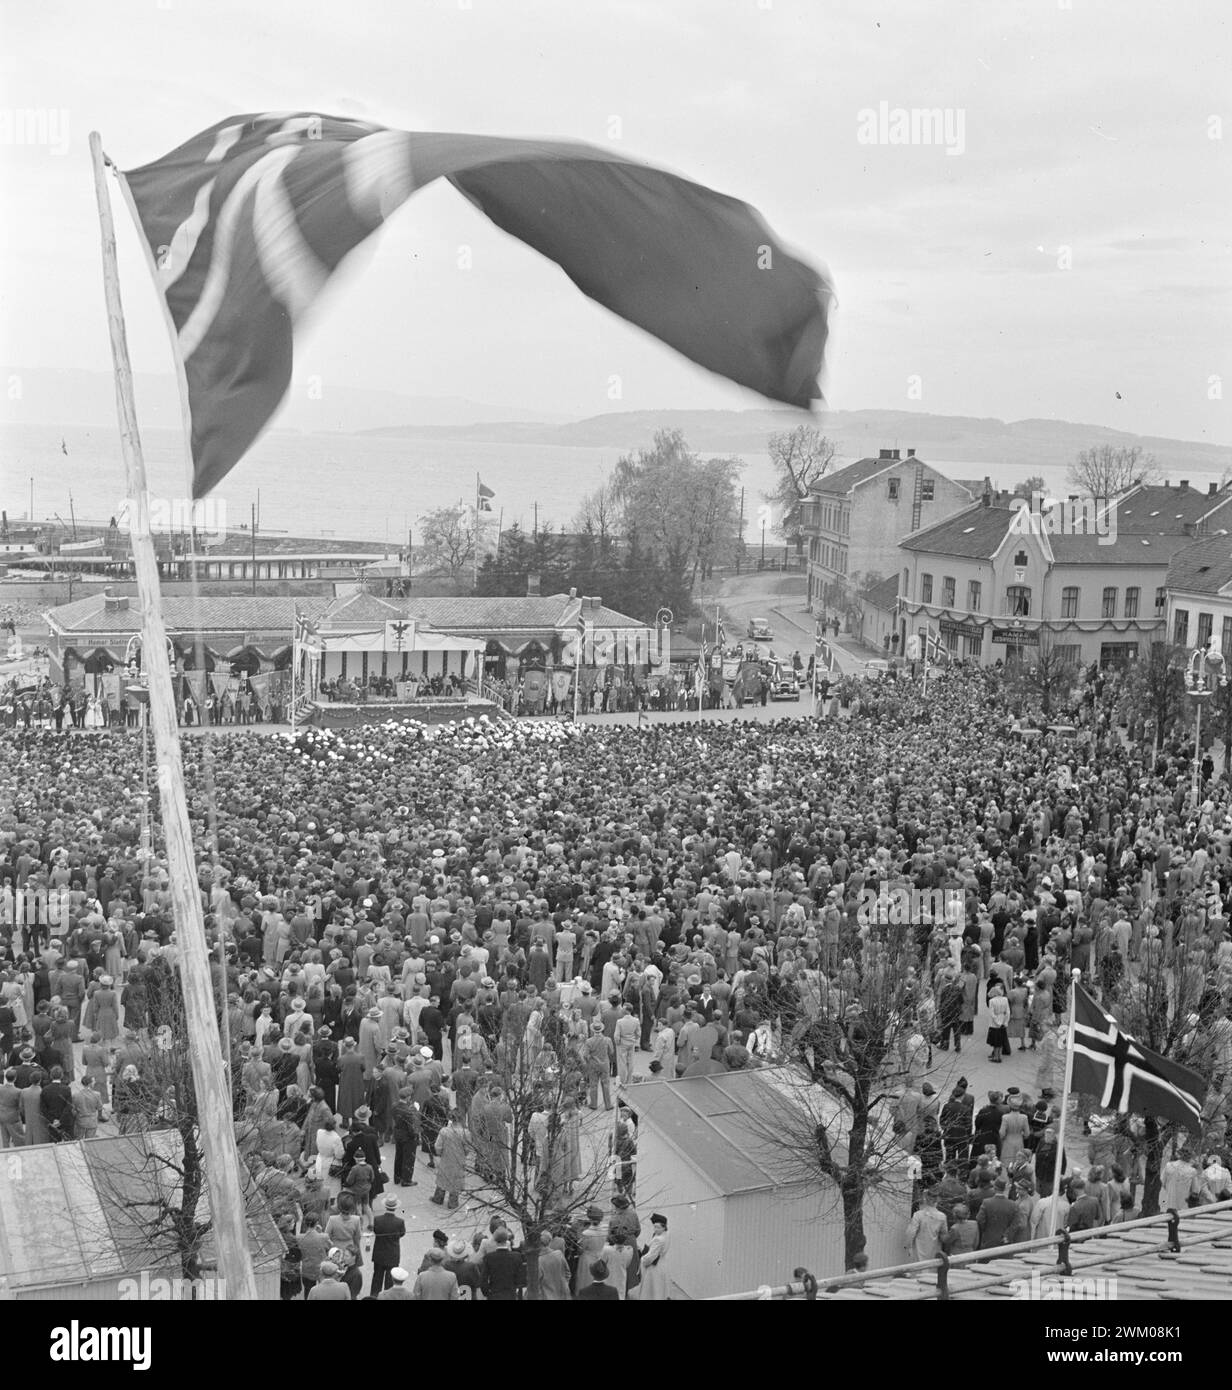 Actual 11-1949: It cannot be trueHamar celebrates and celebrates both its 100th anniversary and its 900th anniversary. About 900 years ago, the kings Harald Hårdråde and Magnus the Good met in Hamar to divide the land and kingdom, and from this time Hamar was considered a city. - The king and the prime minister, the town's mayor and councilor spoke from the tribune on Stortorget, and the square has never been so filled with interested listeners from Hamar and the surrounding area.  Photo; Sverre A. Børretzen / Aktuell / NTB  ***PHOTO NOT IMAGE PROCESSED*** Stock Photo